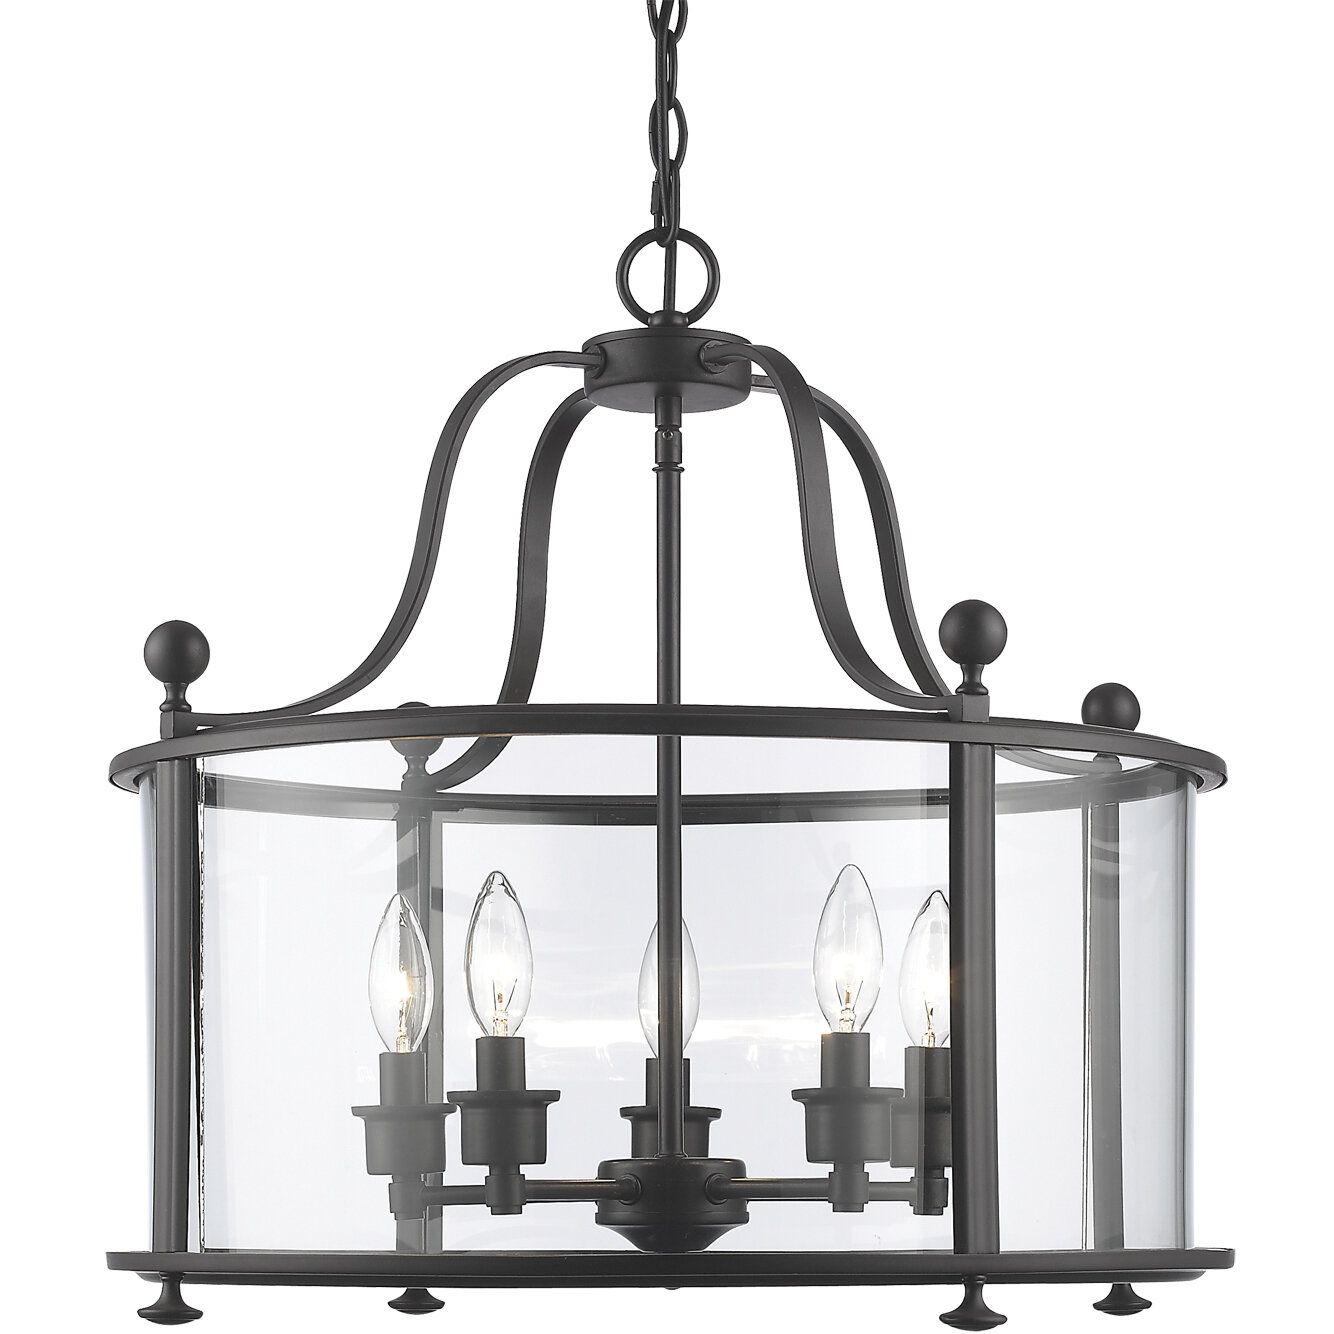 Darby Home Co Kristofer Dimmable Lantern Drum Chandelier & Reviews | Wayfair With Regard To Five Light Lantern Chandeliers (View 13 of 15)